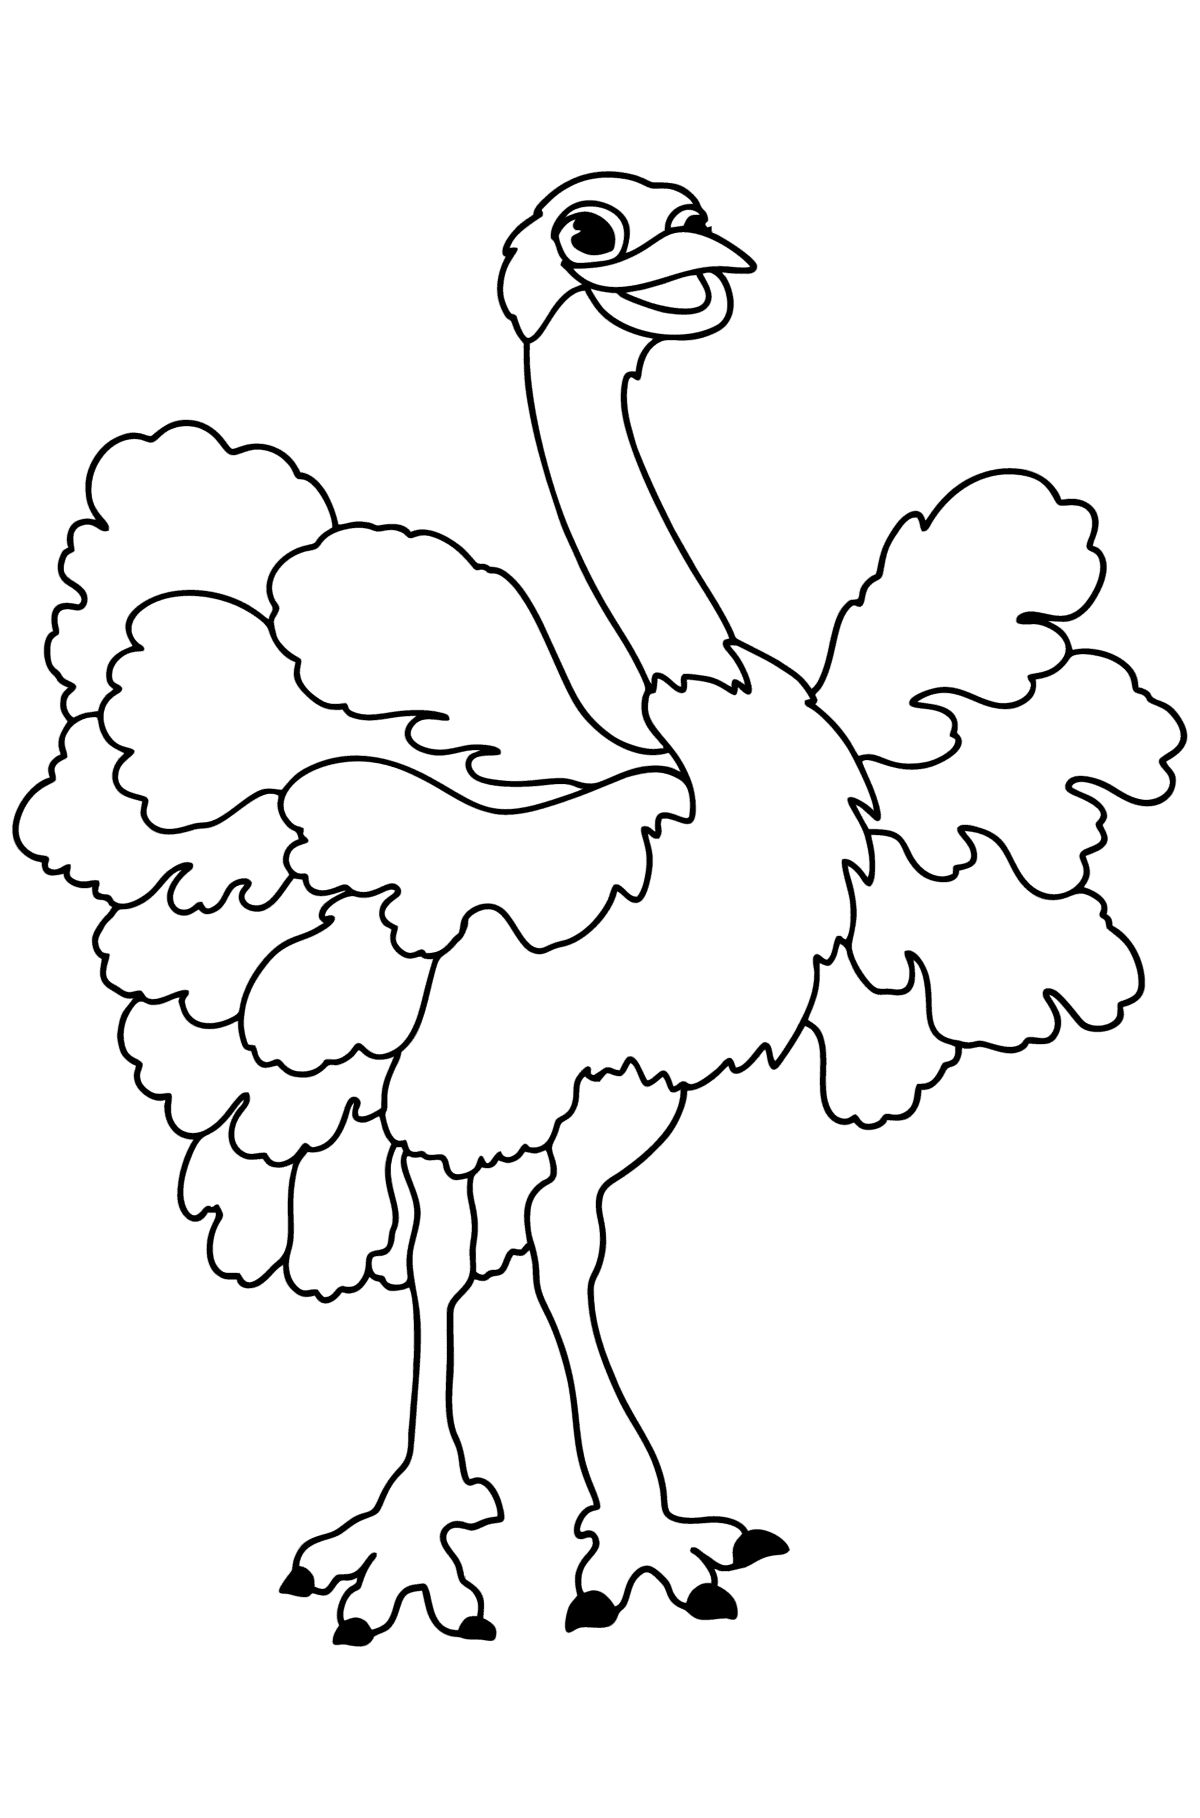 Emu сoloring page - Coloring Pages for Kids